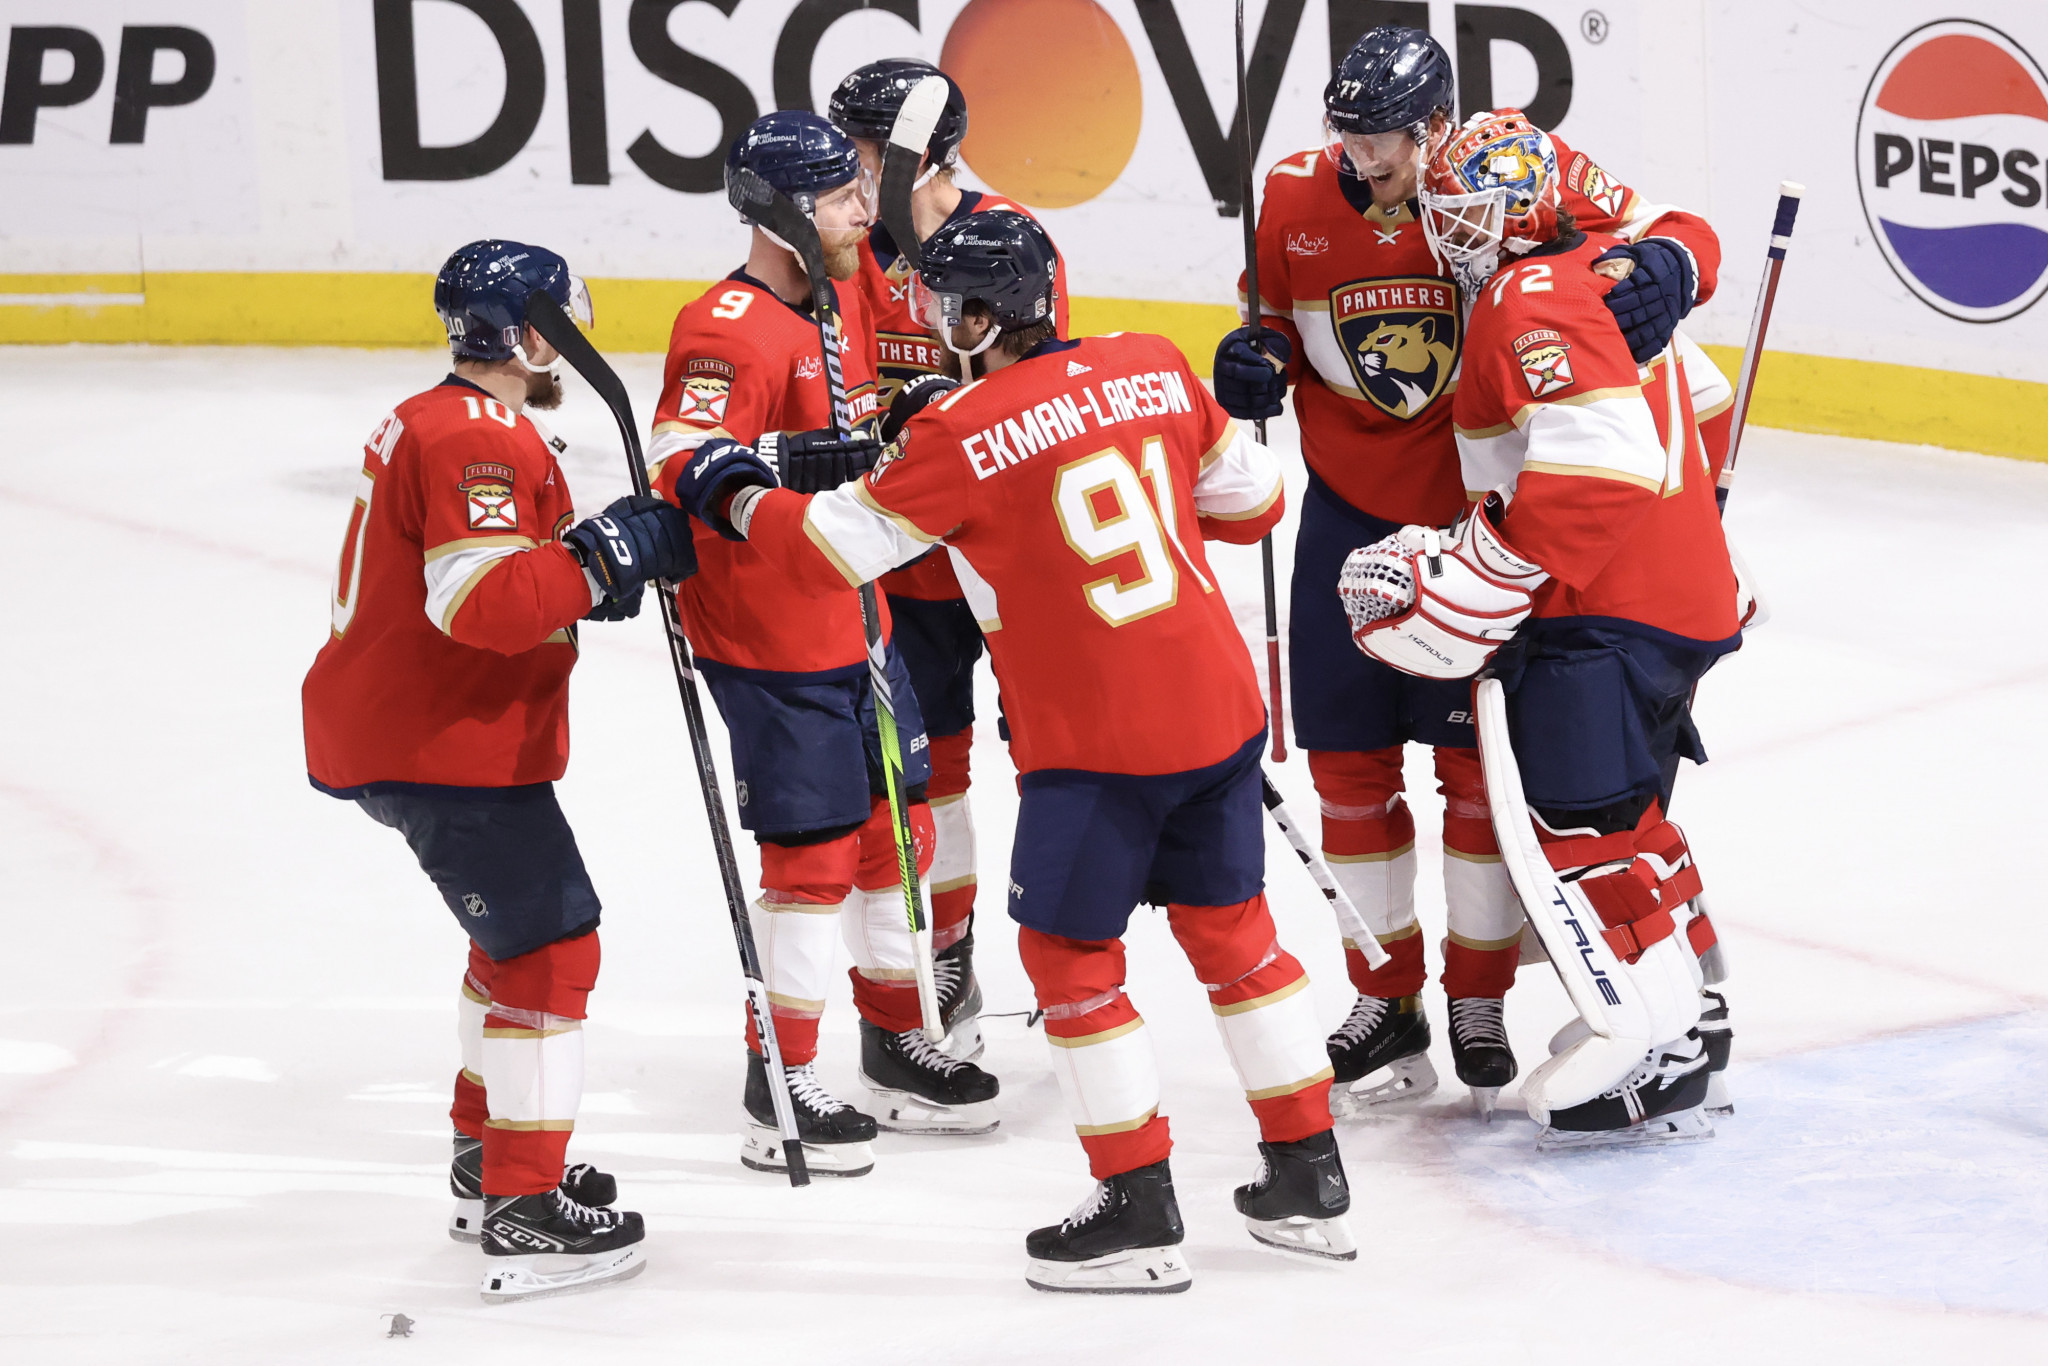 Panthers defeated Rangers 2-1 to reach the Stanley Cup final. GETTY IMAGES